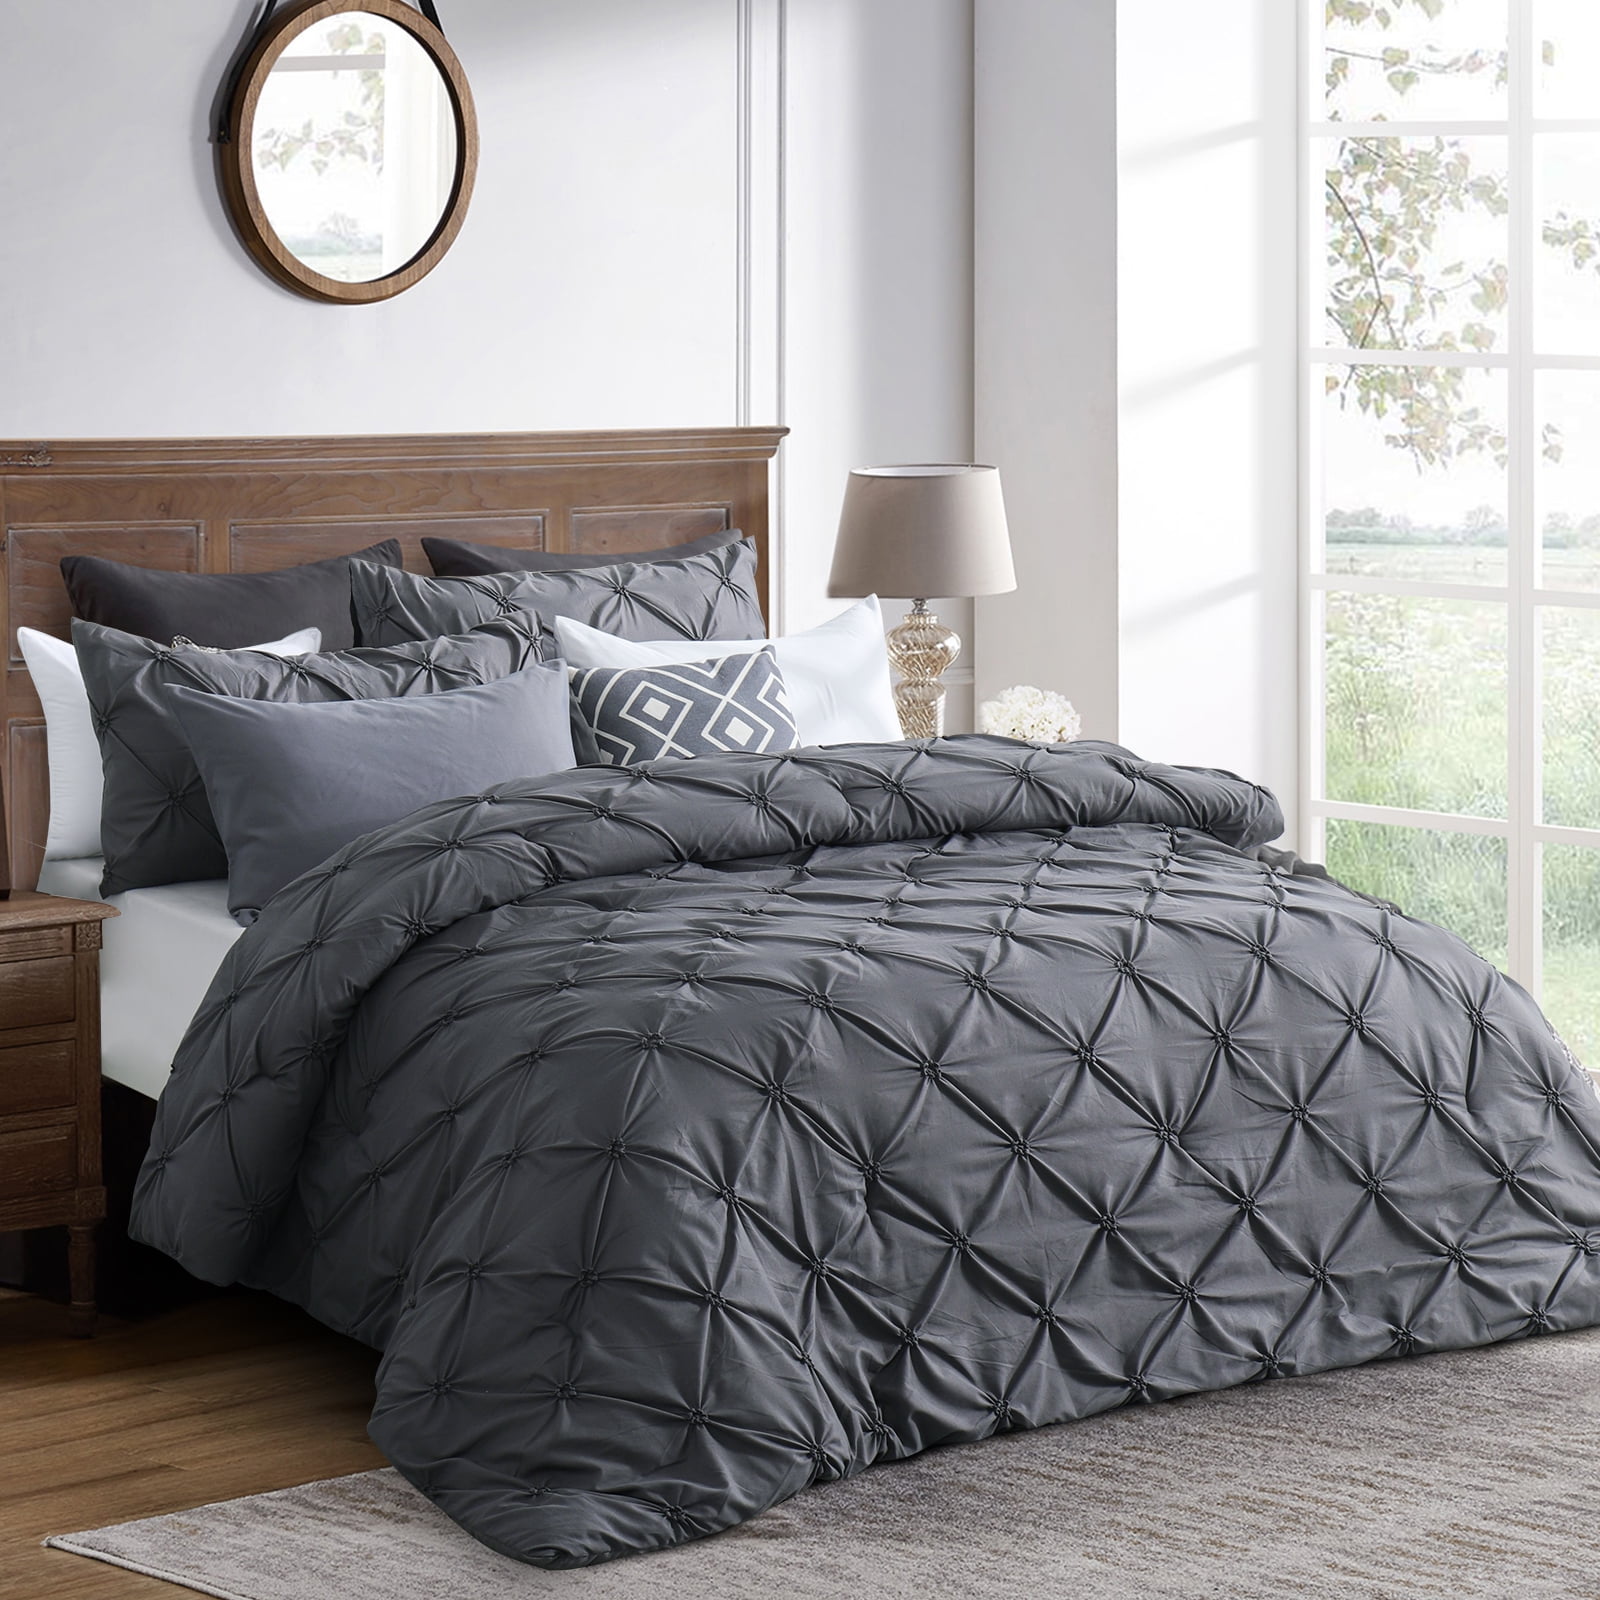 king comforter set: Bedding & Bedding Collections